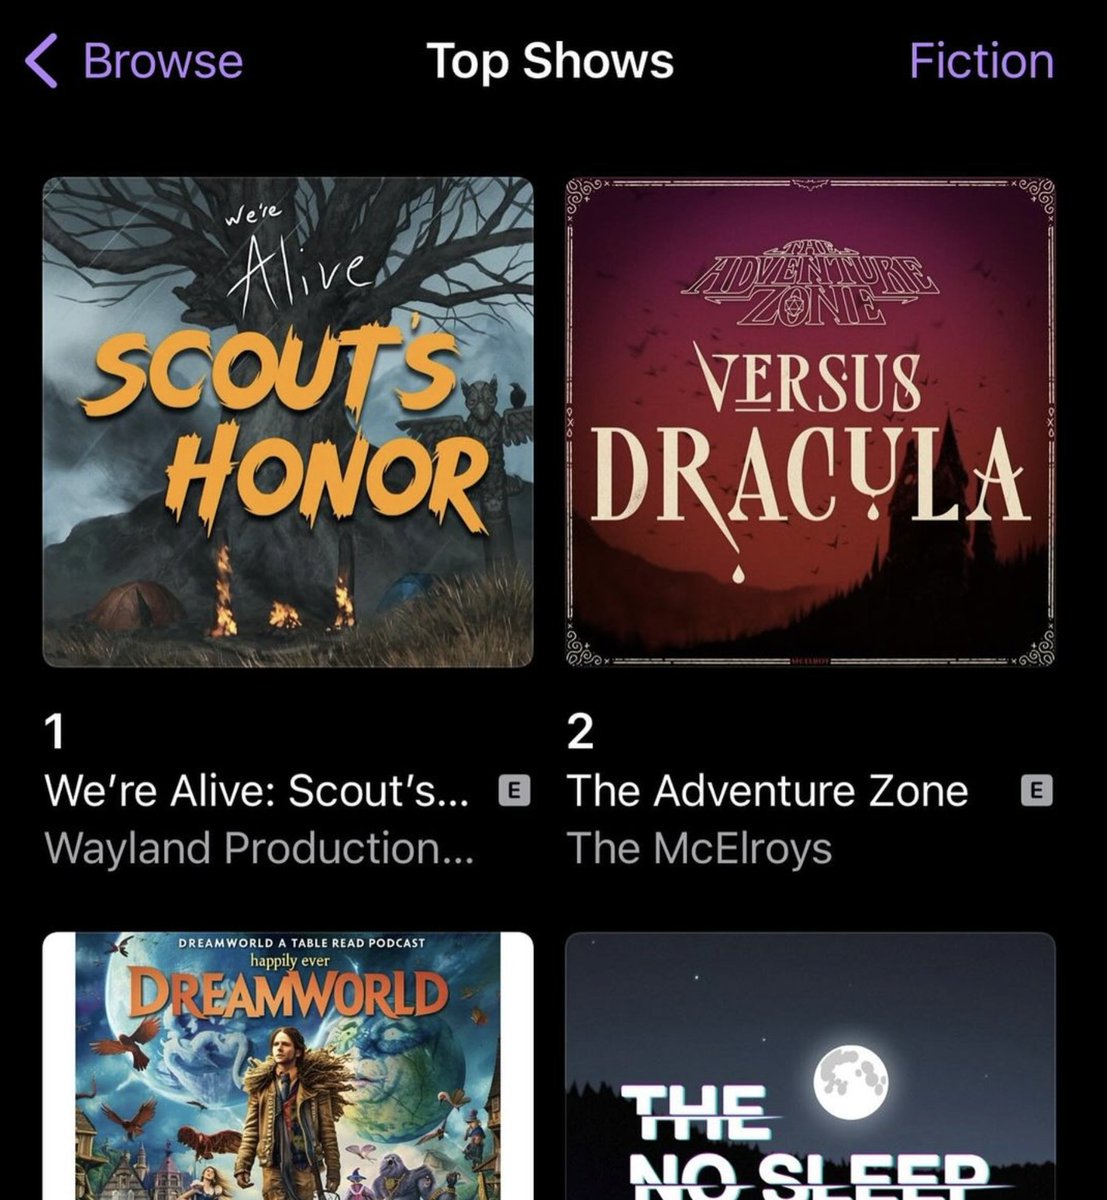 We're Alive: Scout's Honor hit #1 on the Apple #Podcast Fiction Charts! Thank you to everyone who has listened and left a review, it really helps us out!